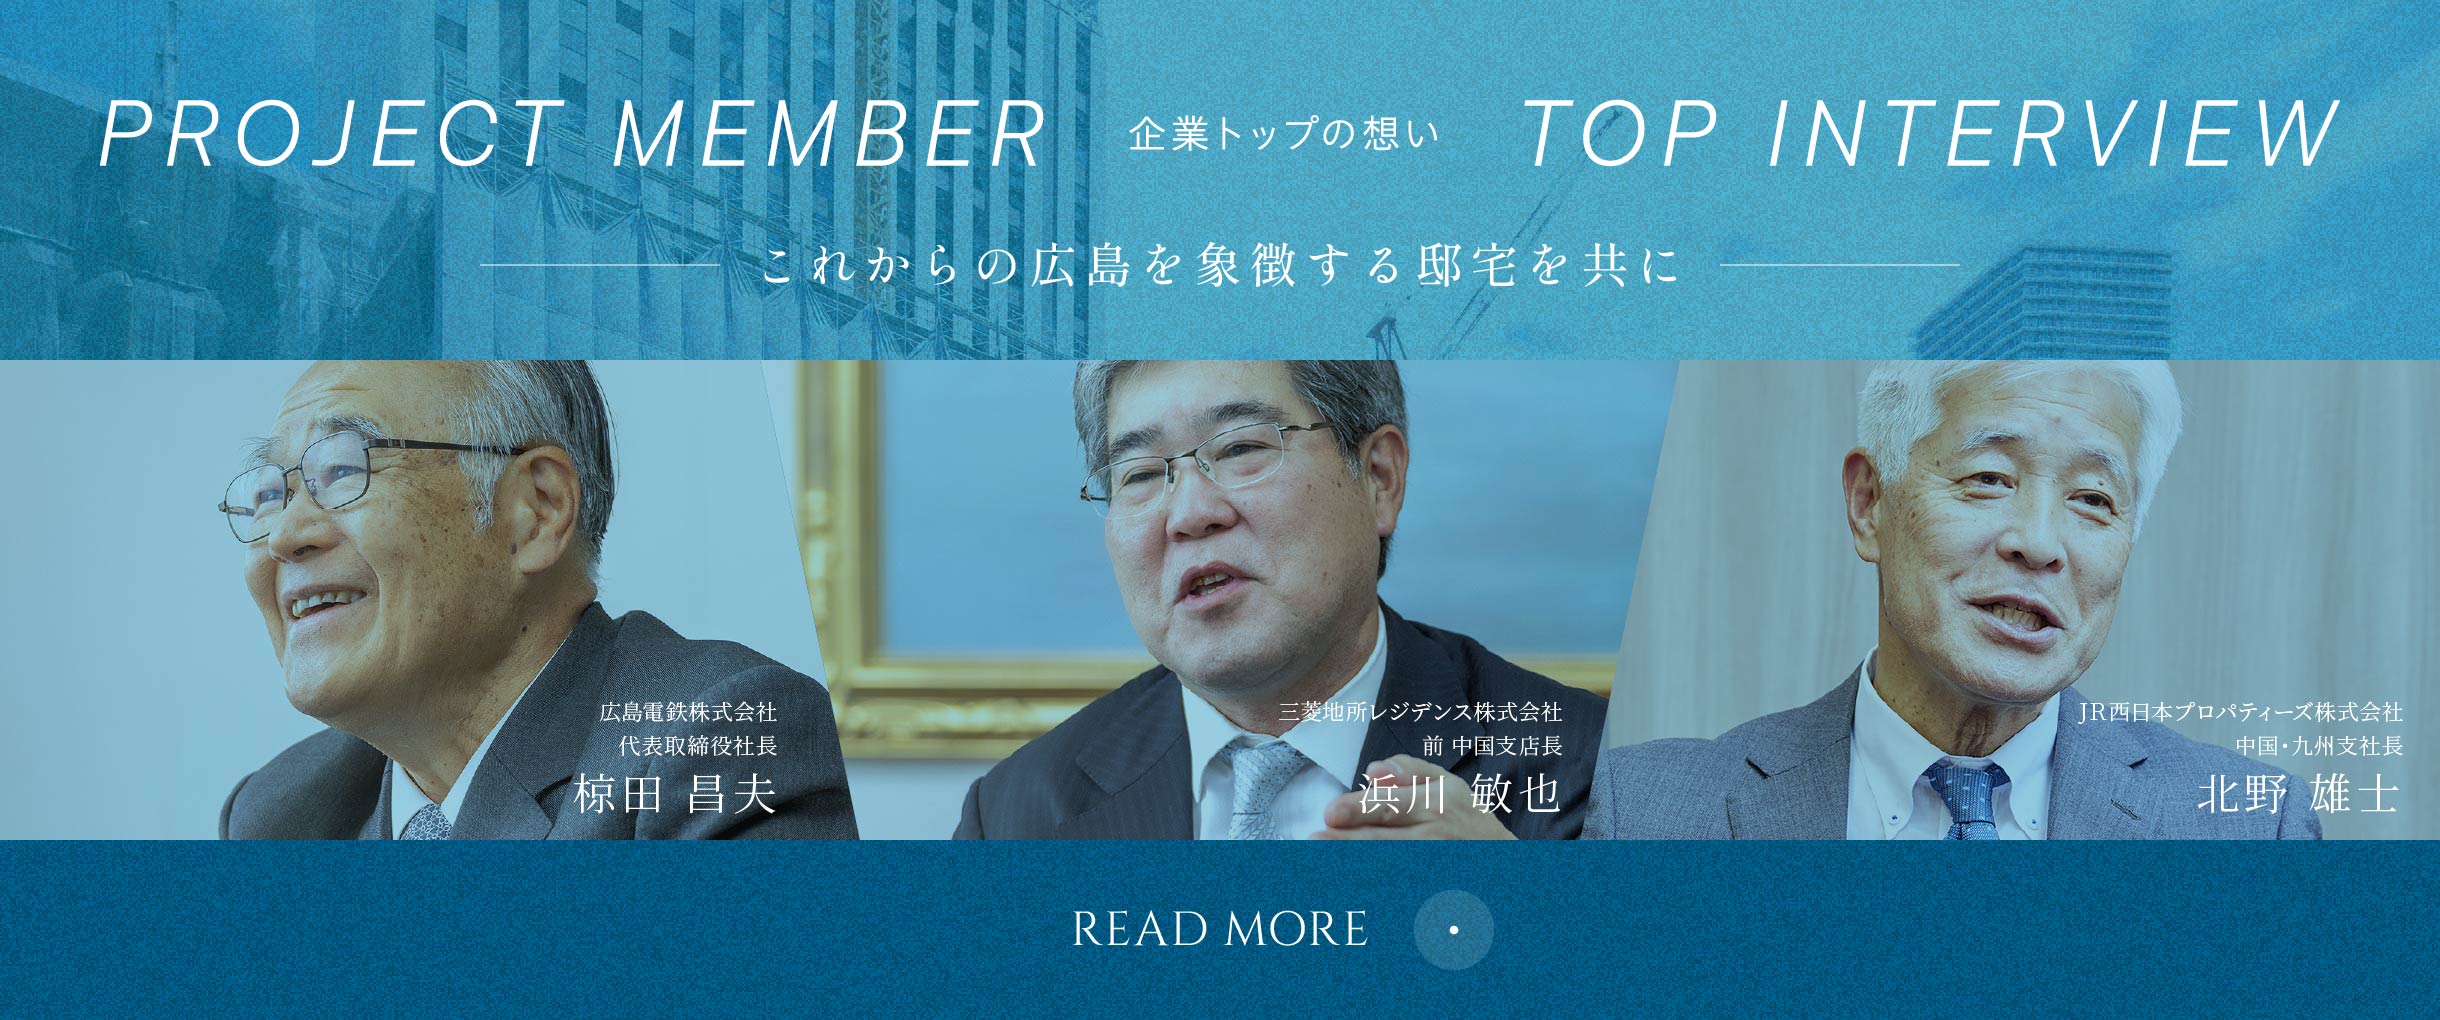 Project Member 企業トップの想い Read More